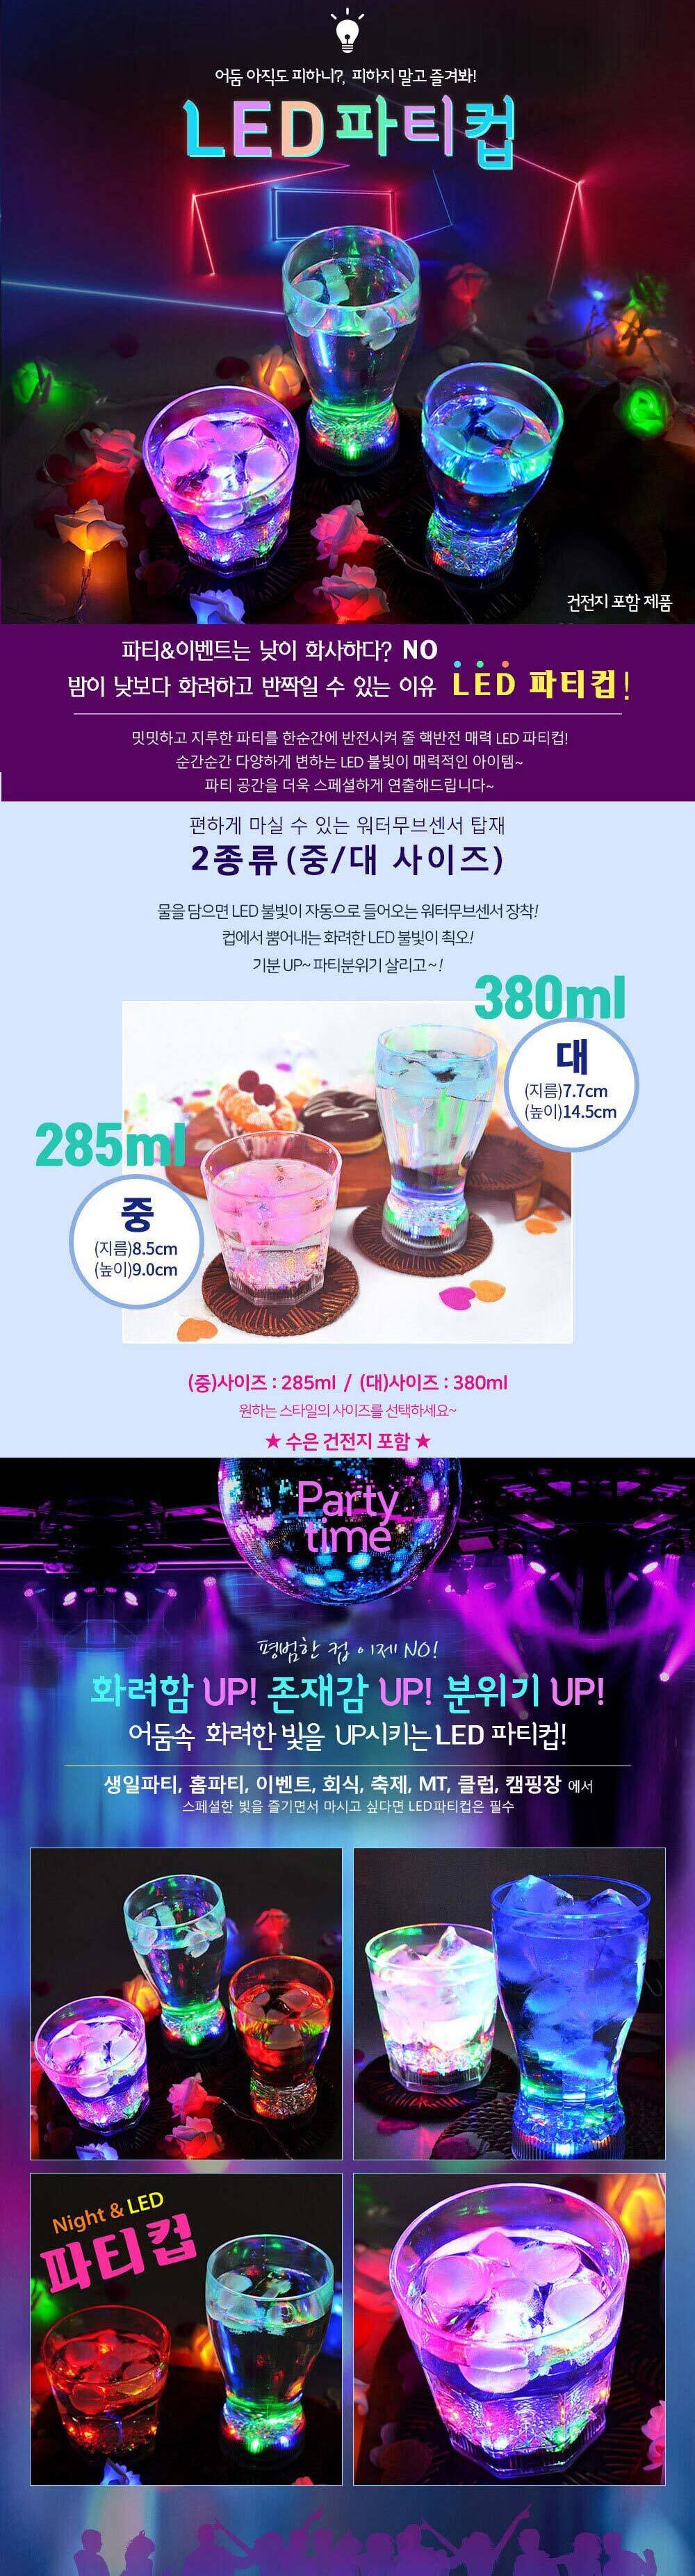 party_led_cup_m_001.jpg